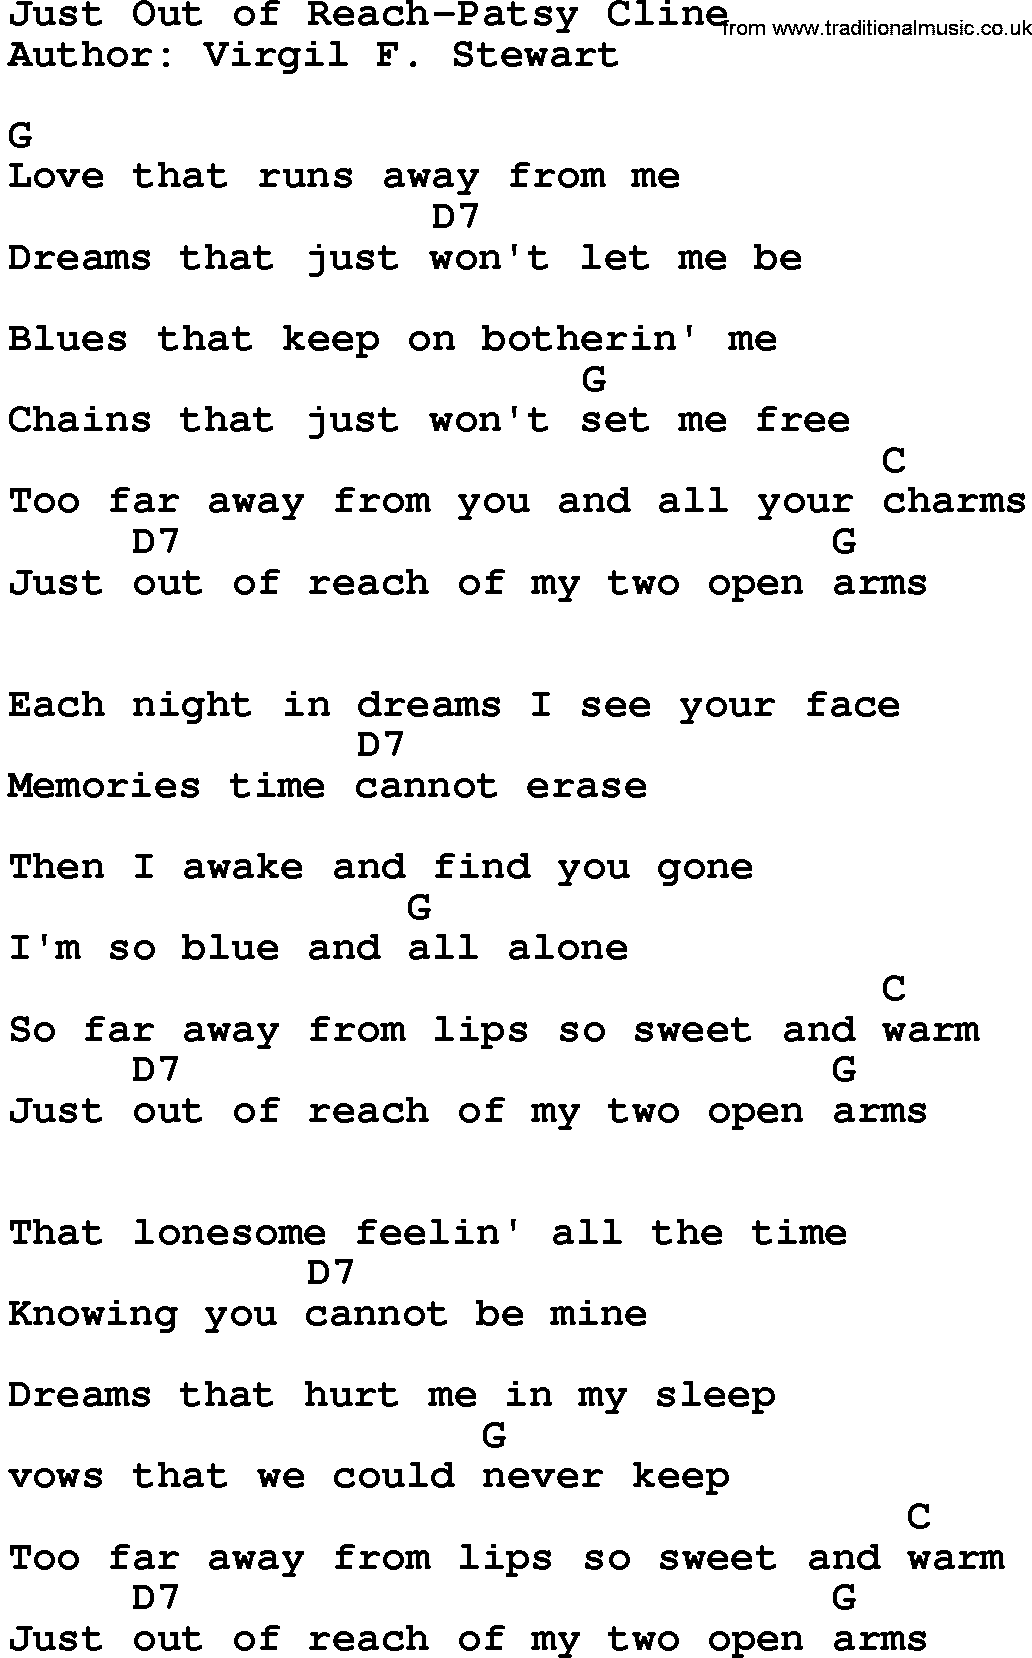 Country music song: Just Out Of Reach-Patsy Cline lyrics and chords